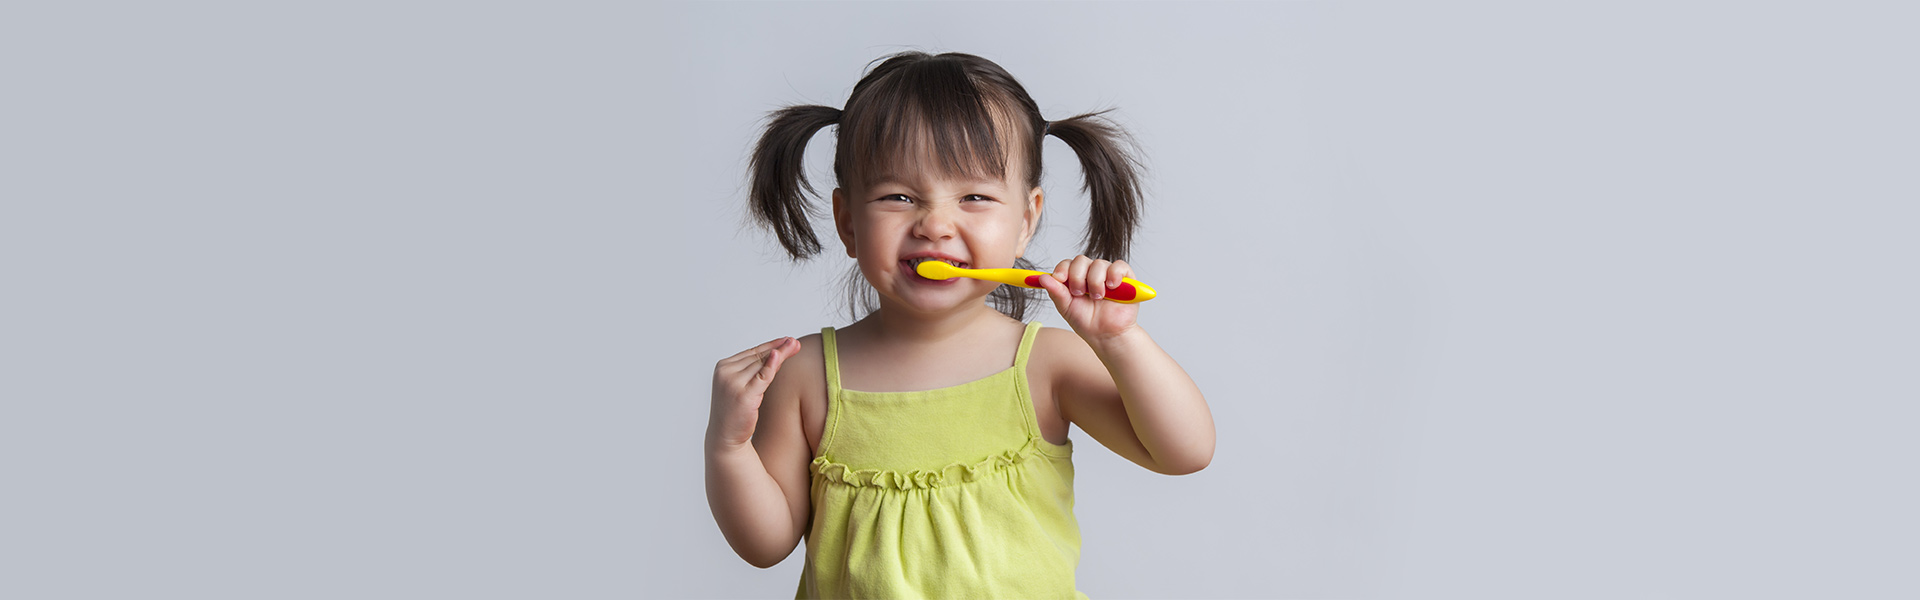 4 Reasons Why Maintaining Your Child’s Dental Health Is Important